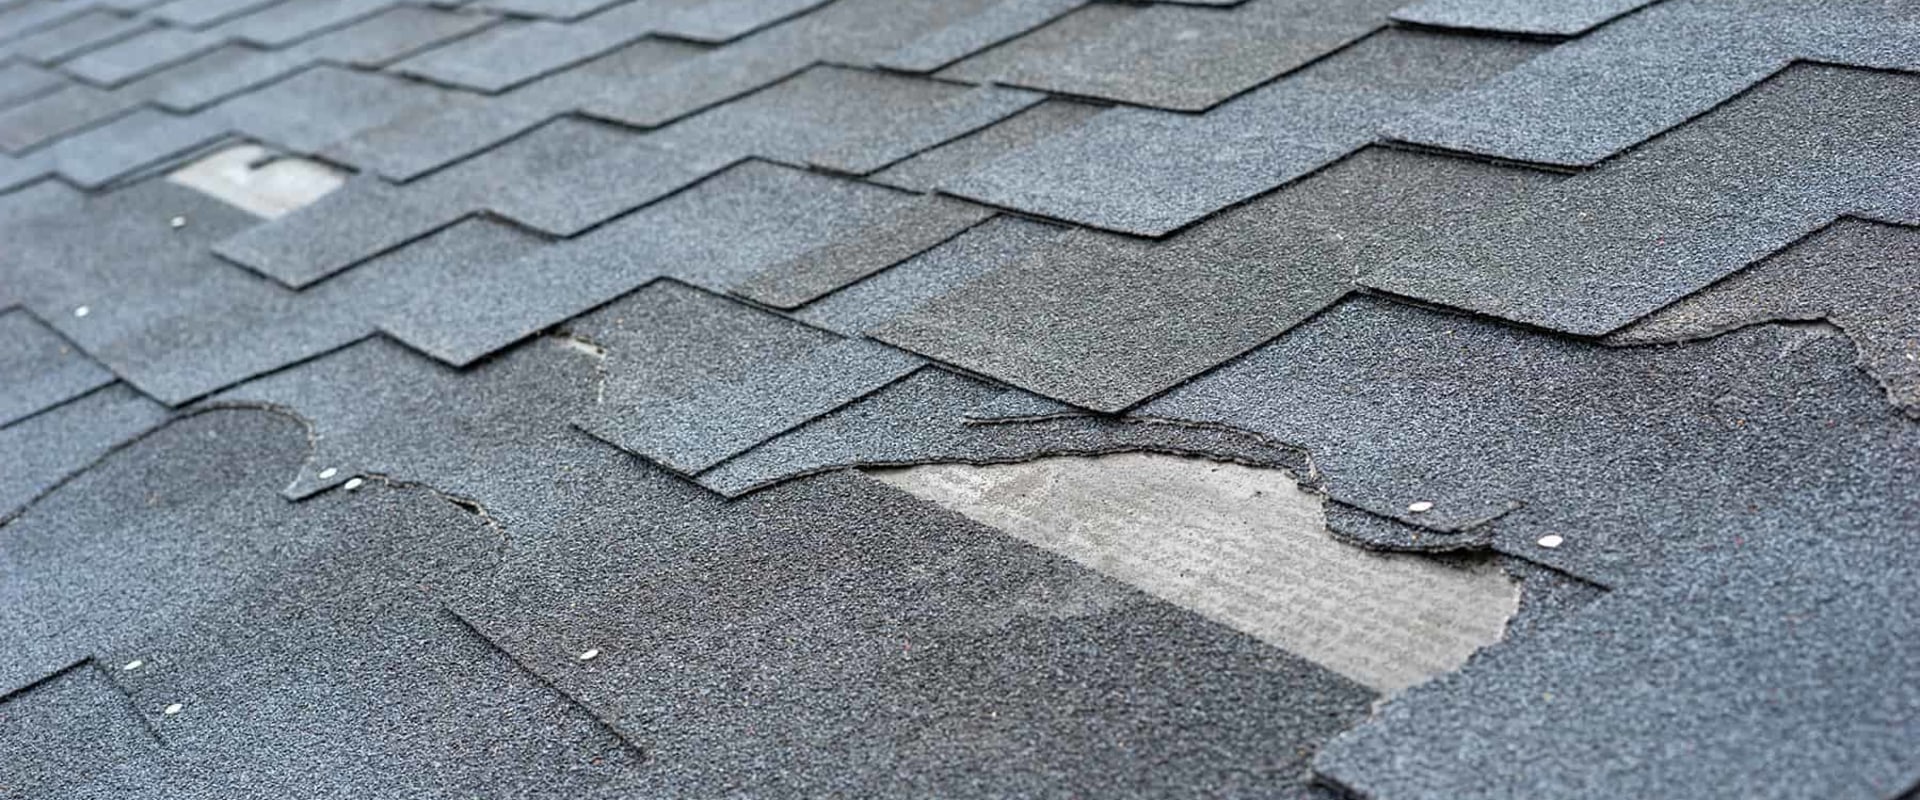 Durability and Lifespan of Asphalt Shingles: What You Need to Know